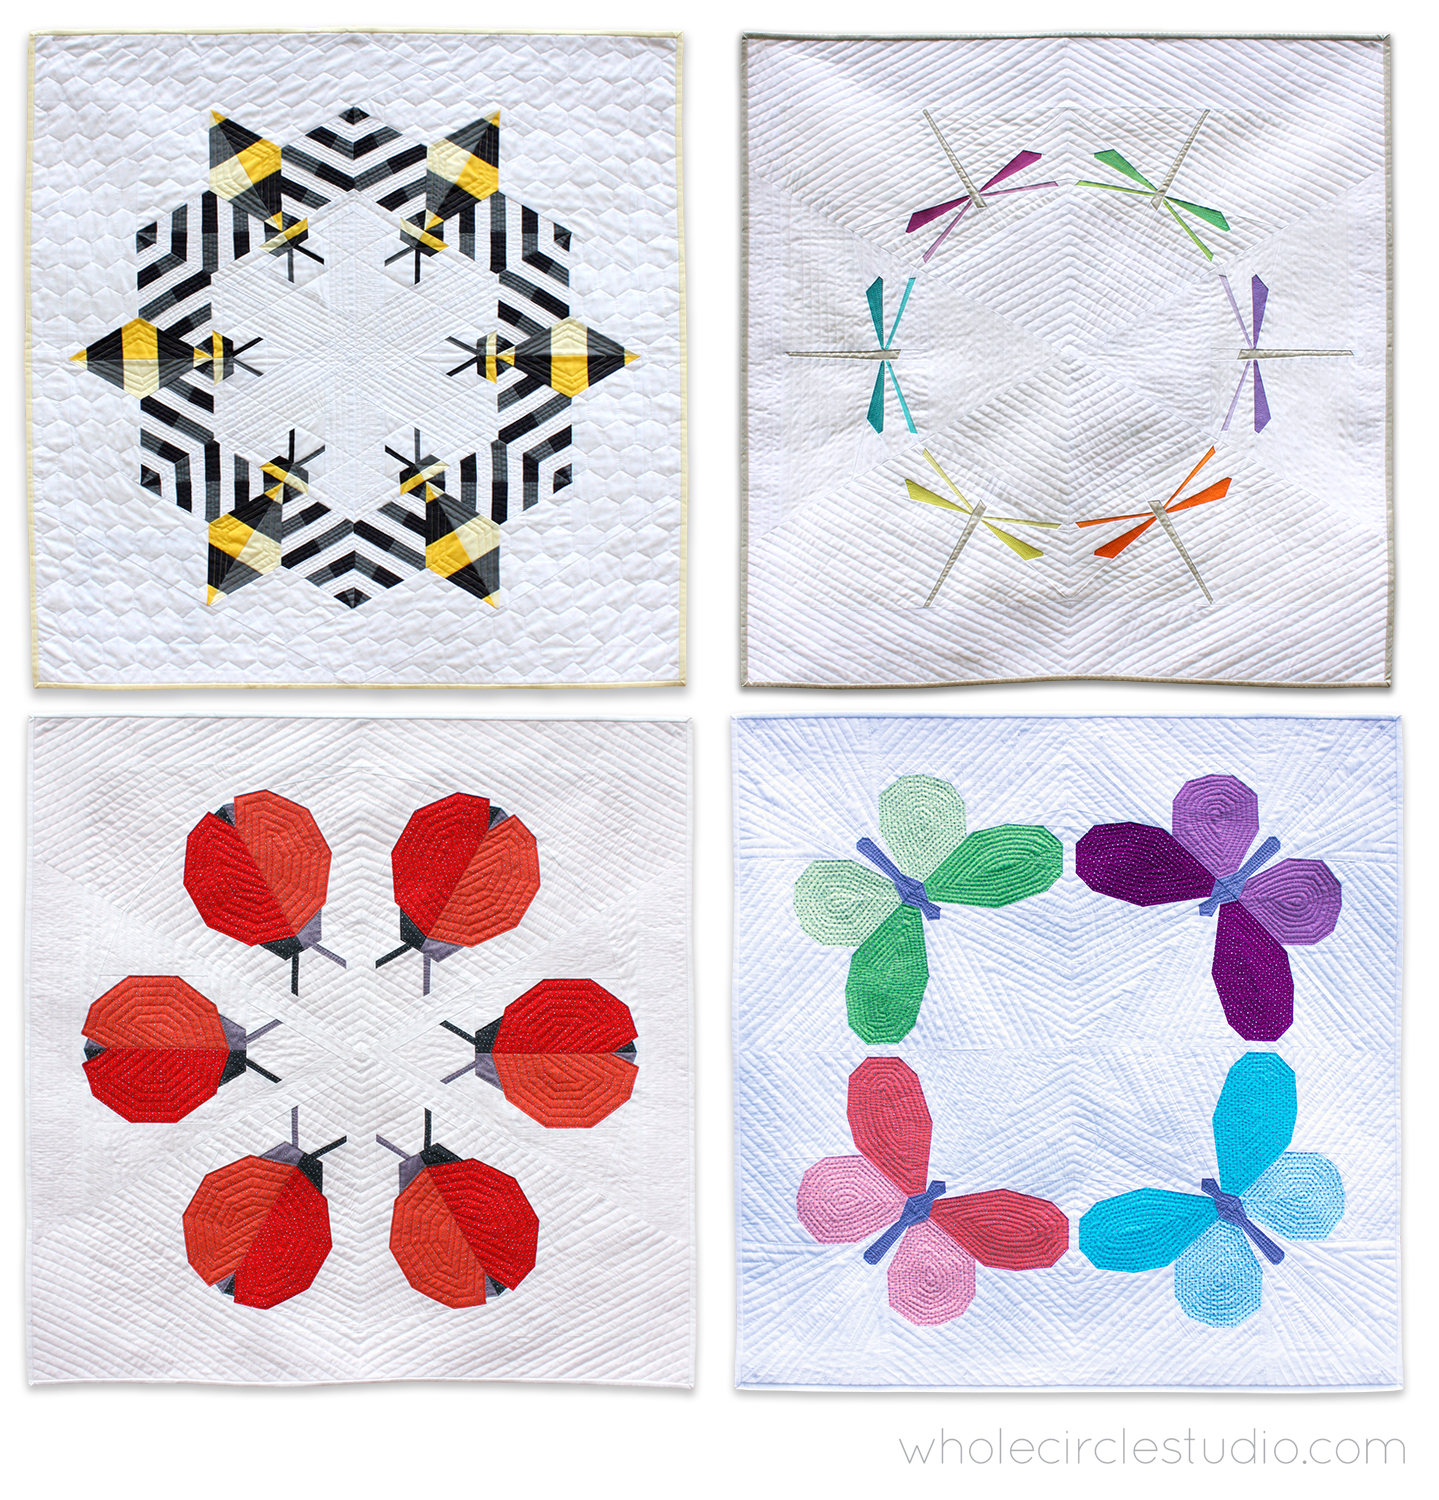 4 modern insect quilts. Bees, dragonflies, ladybugs, and butterflies arranged in circles